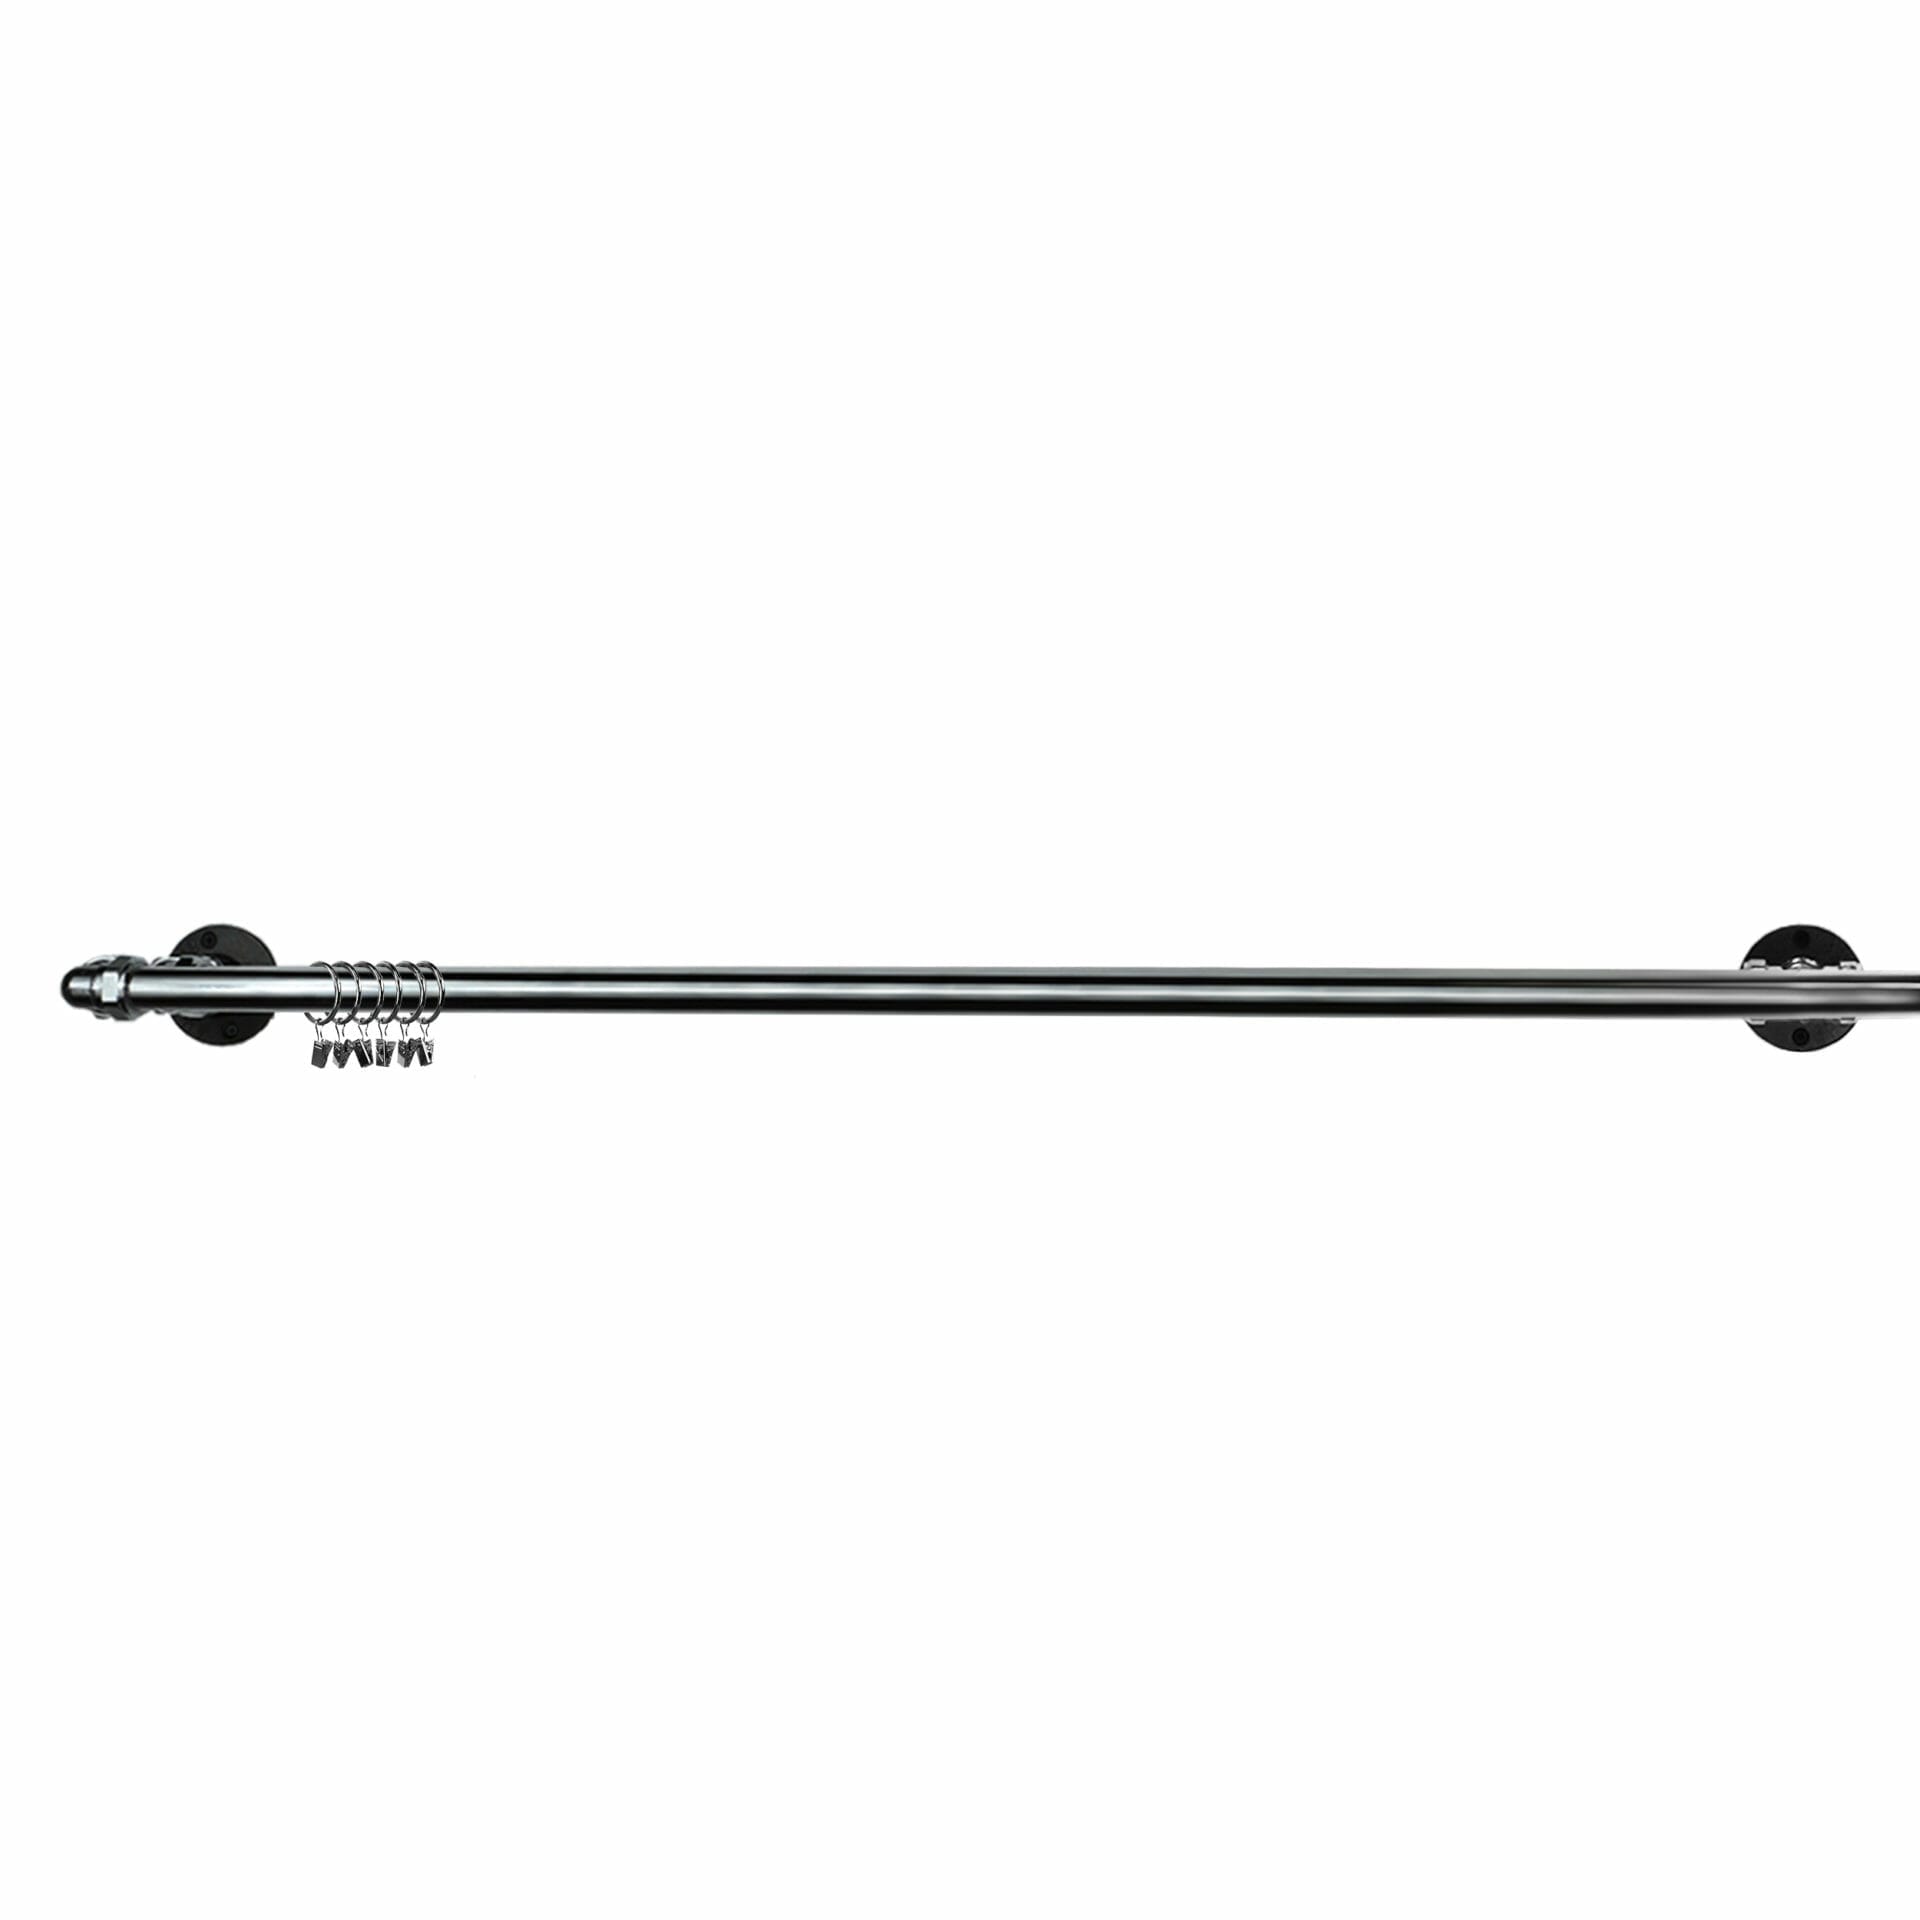 Chrome industrial pipe double curtain pole pipedreamfurniture